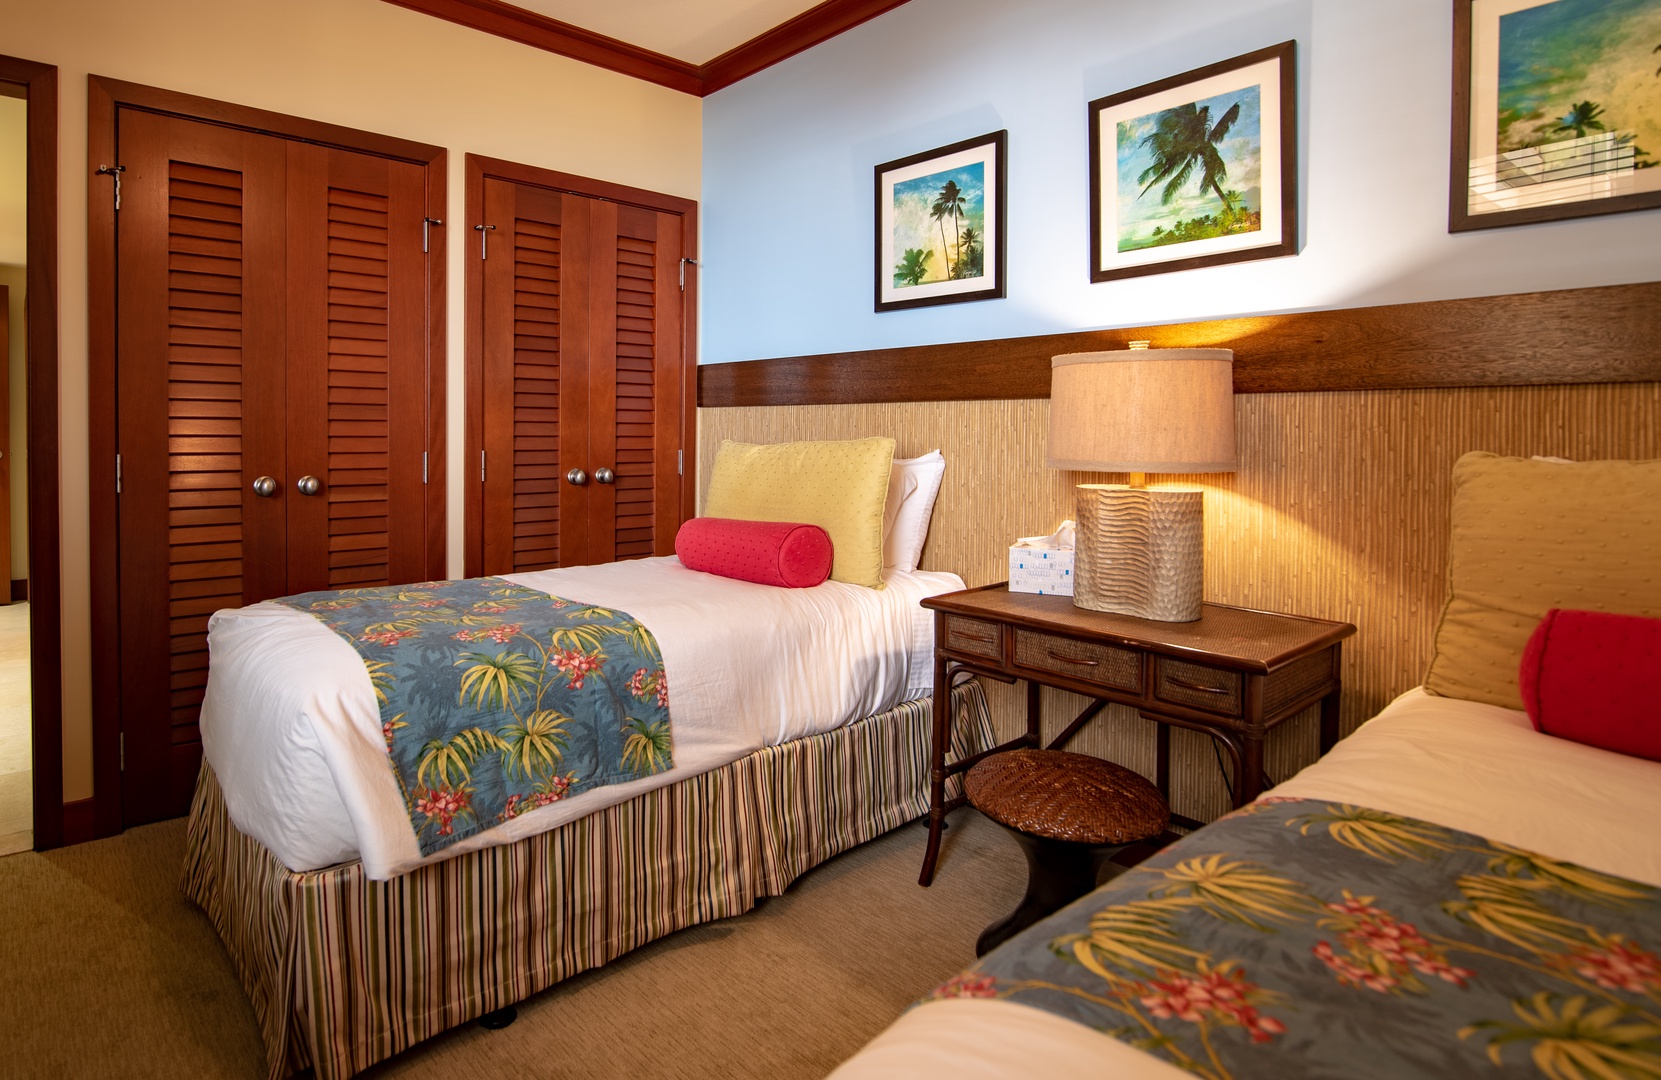 Kapolei Vacation Rentals, Ko Olina Beach Villas O1011 - The third guest bedroom featuring colorful prints and twin beds.